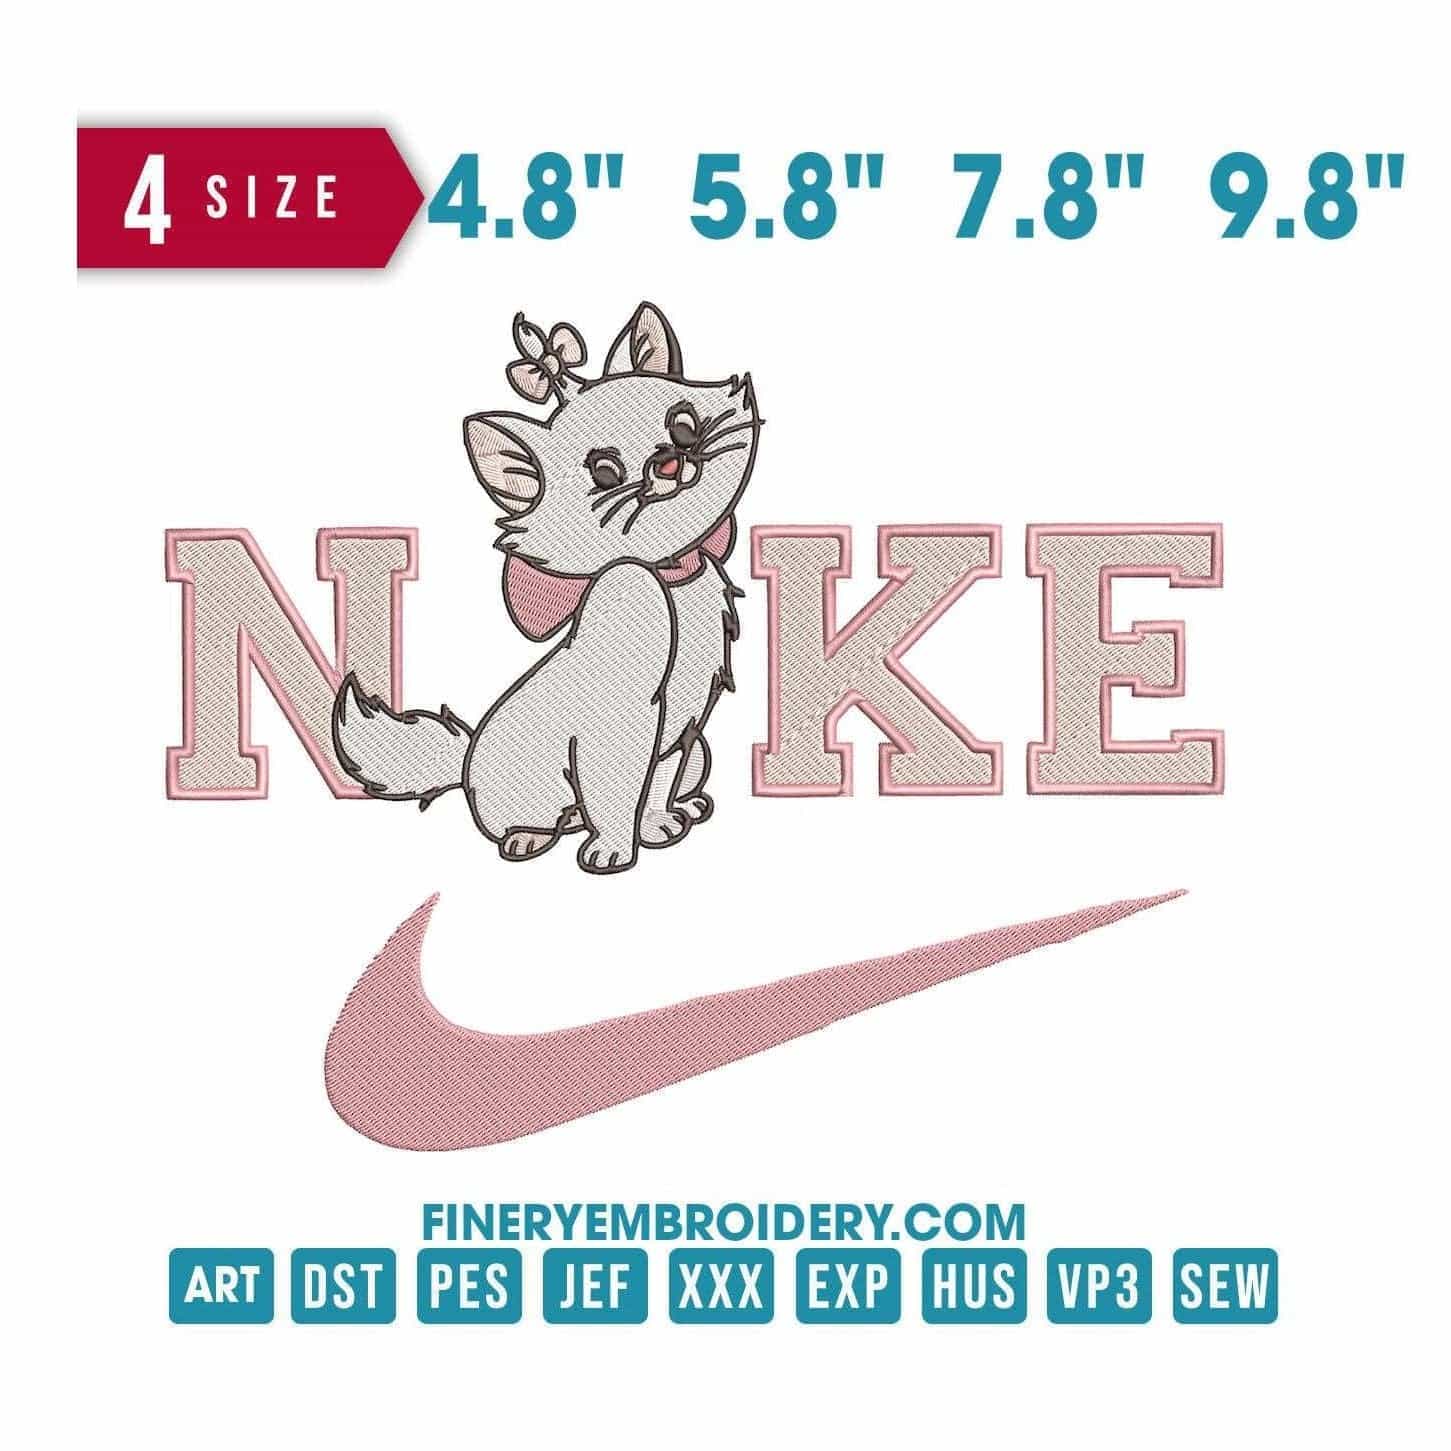 Nike Marie - The Aristocats - Embroidery Design FineryEmbroidery